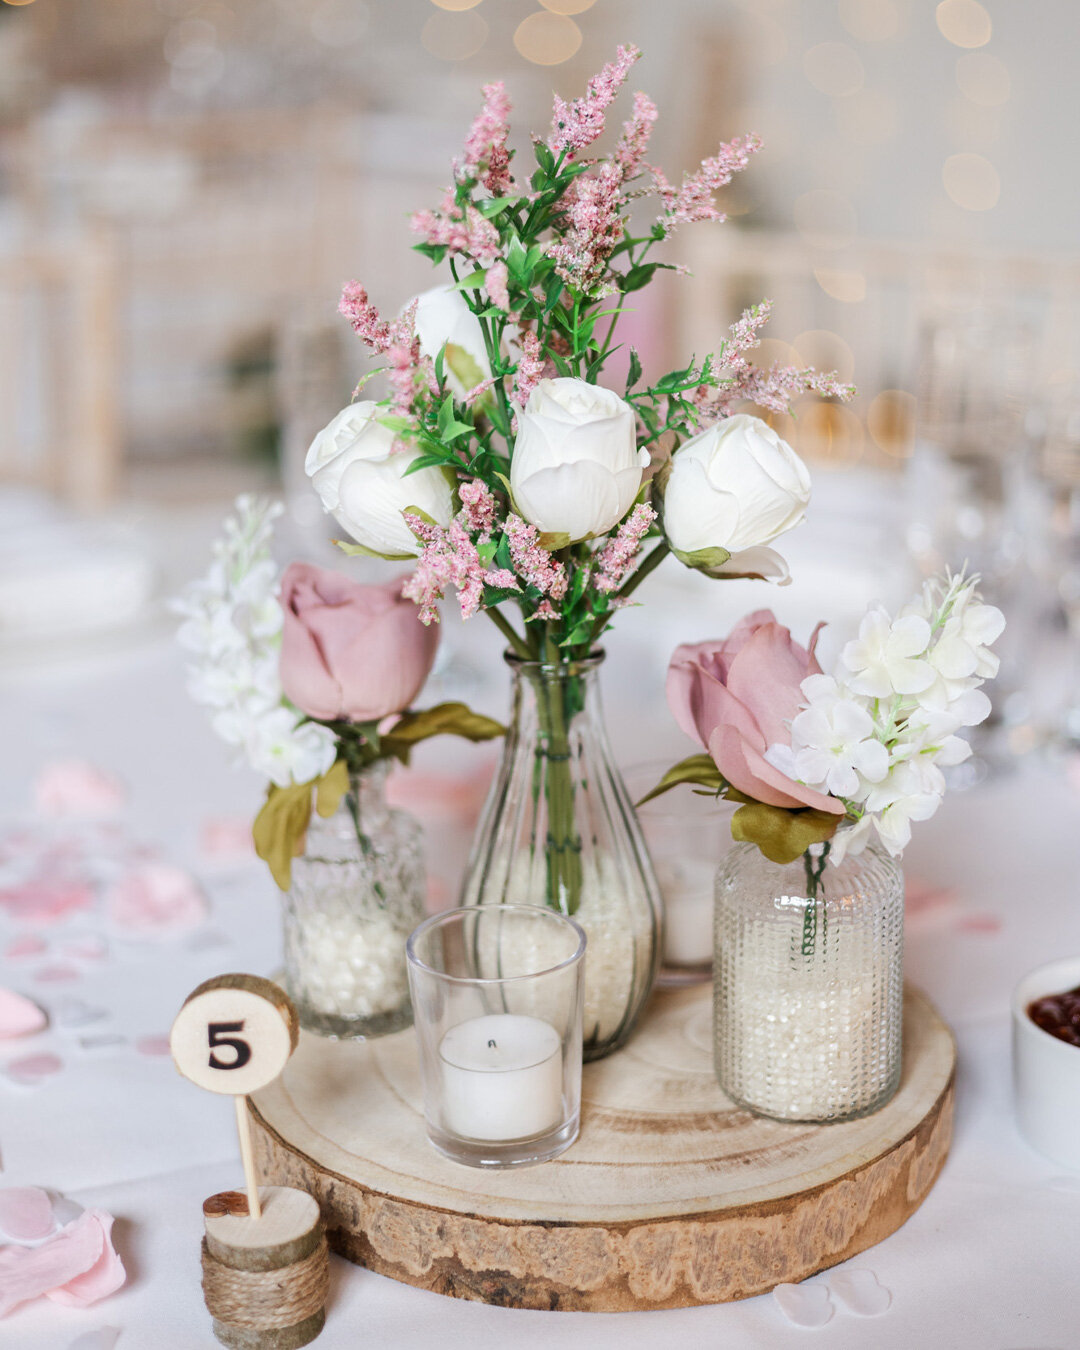 Delicate flowers in little vases have been very popular over the last year as centre pieces. They are easy to make yourself, or have your florist create them and they look so cute! But we also love the hoops that create a statement piece but allows t